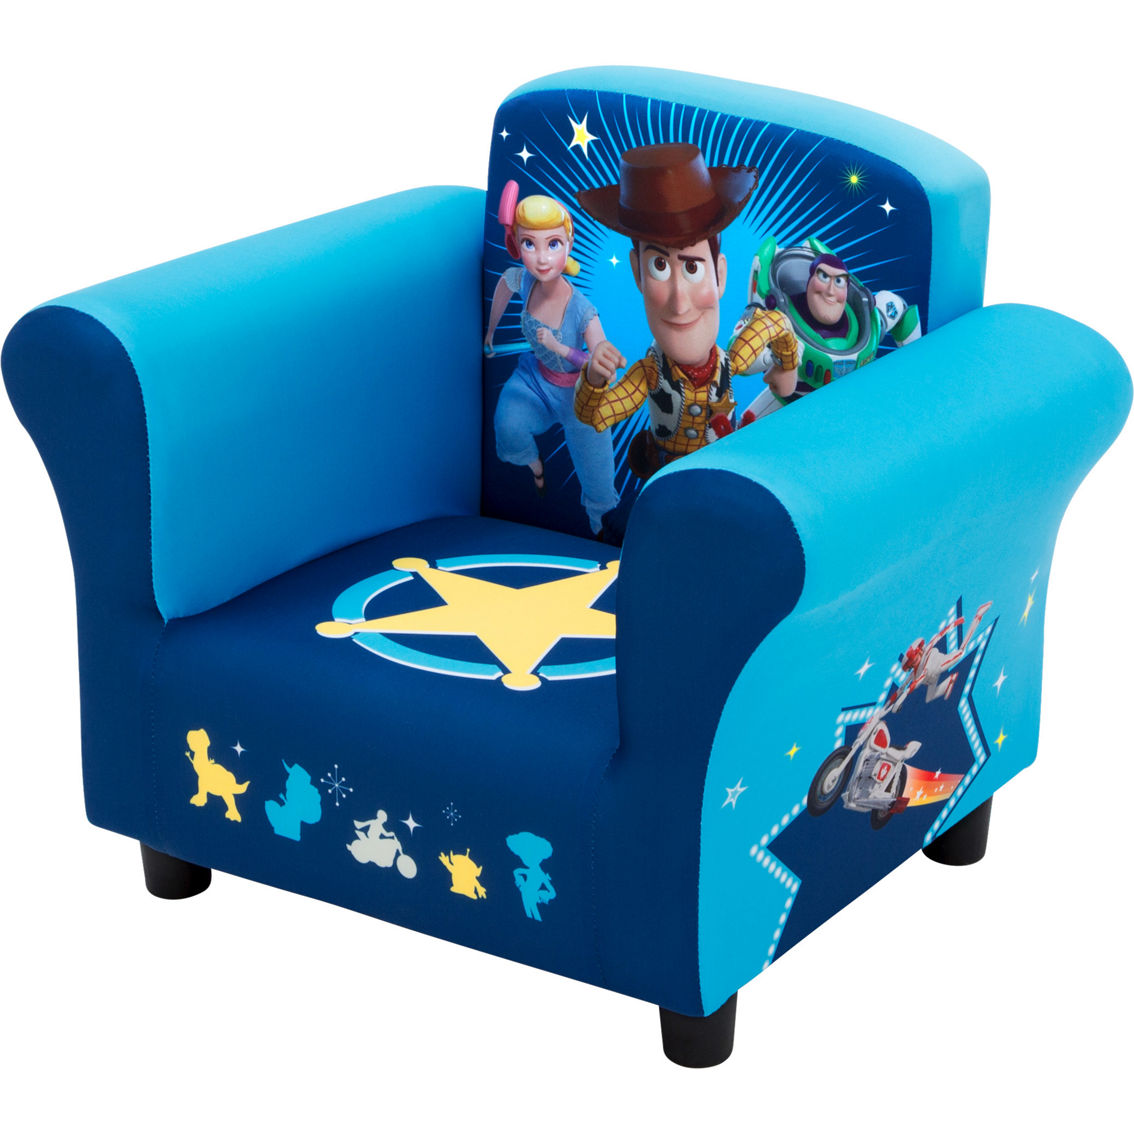 Delta Children Toy Story 4 Kids Upholstered Chair - Image 2 of 6